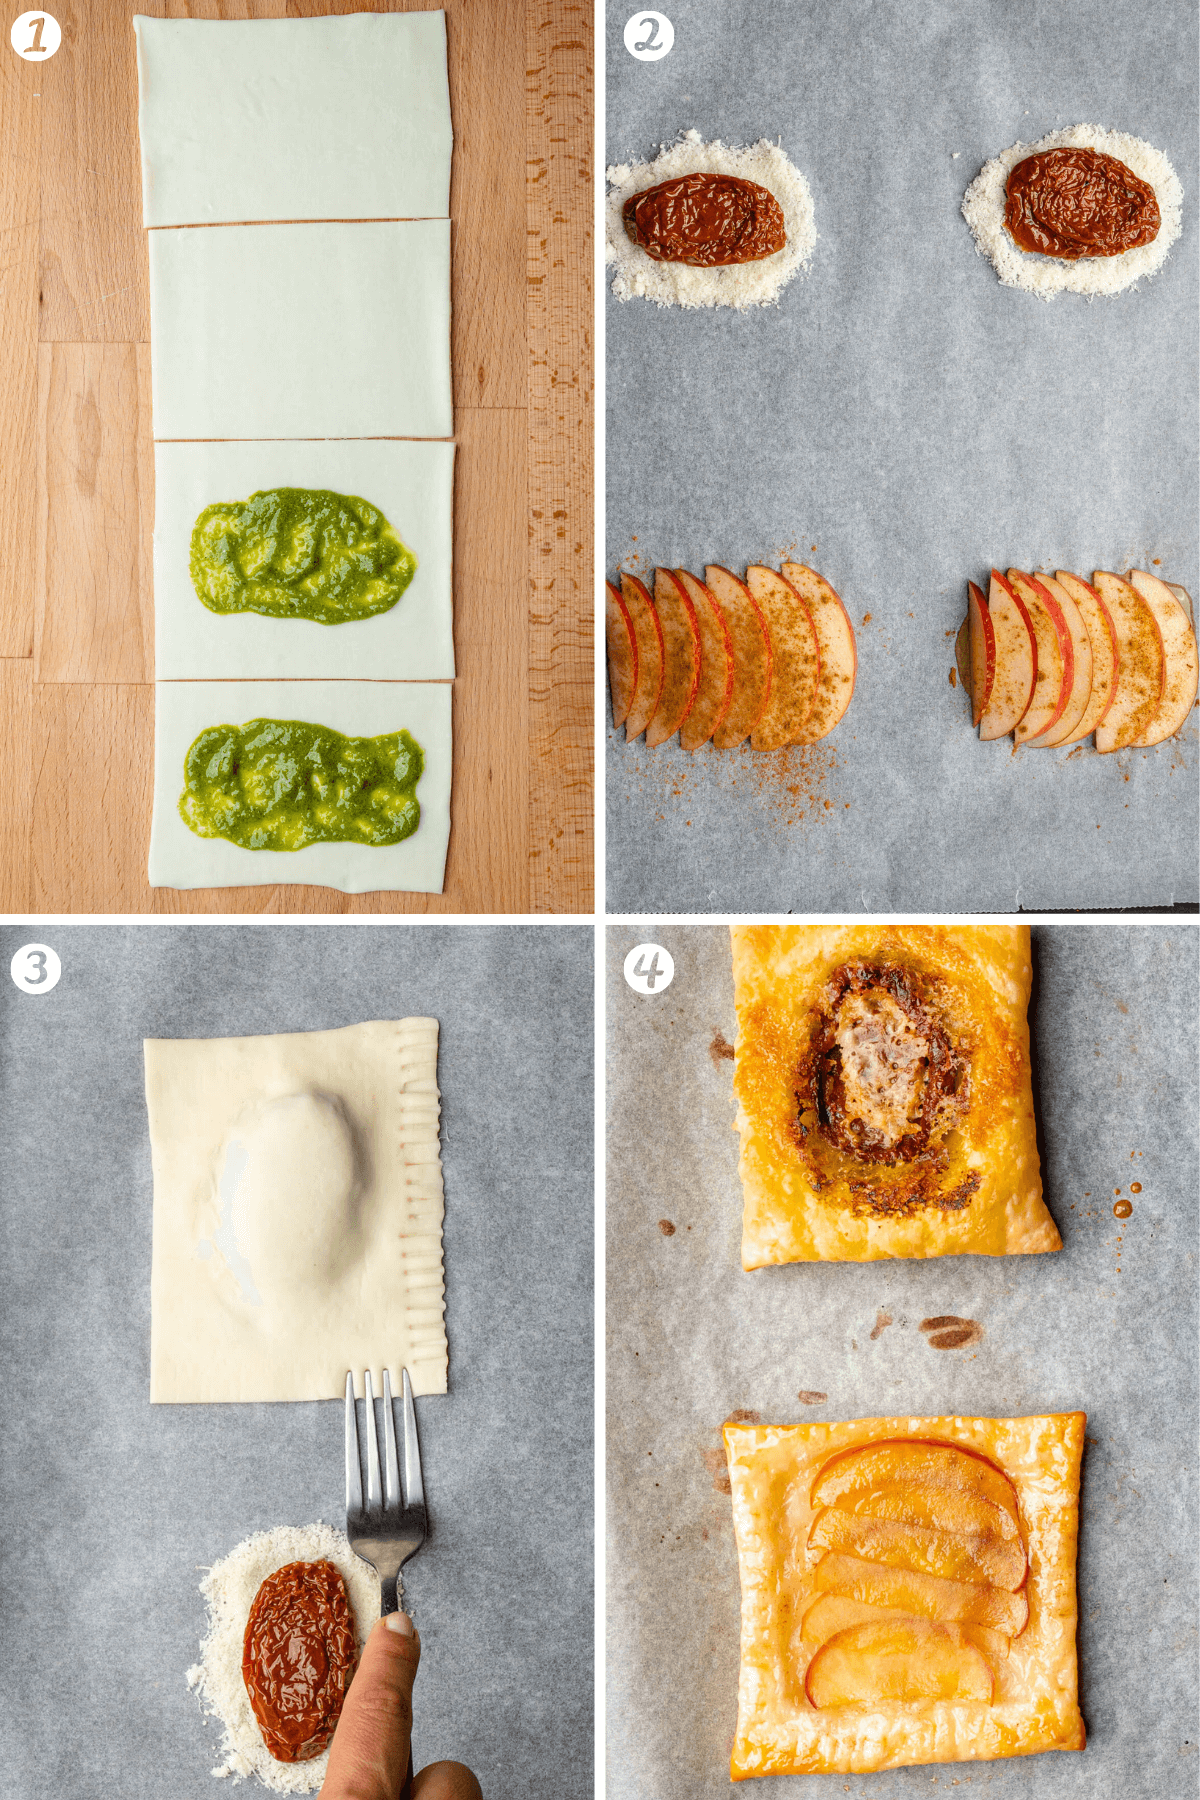 Steps on how to make Upside Down Puff Pastries, sweet and savory